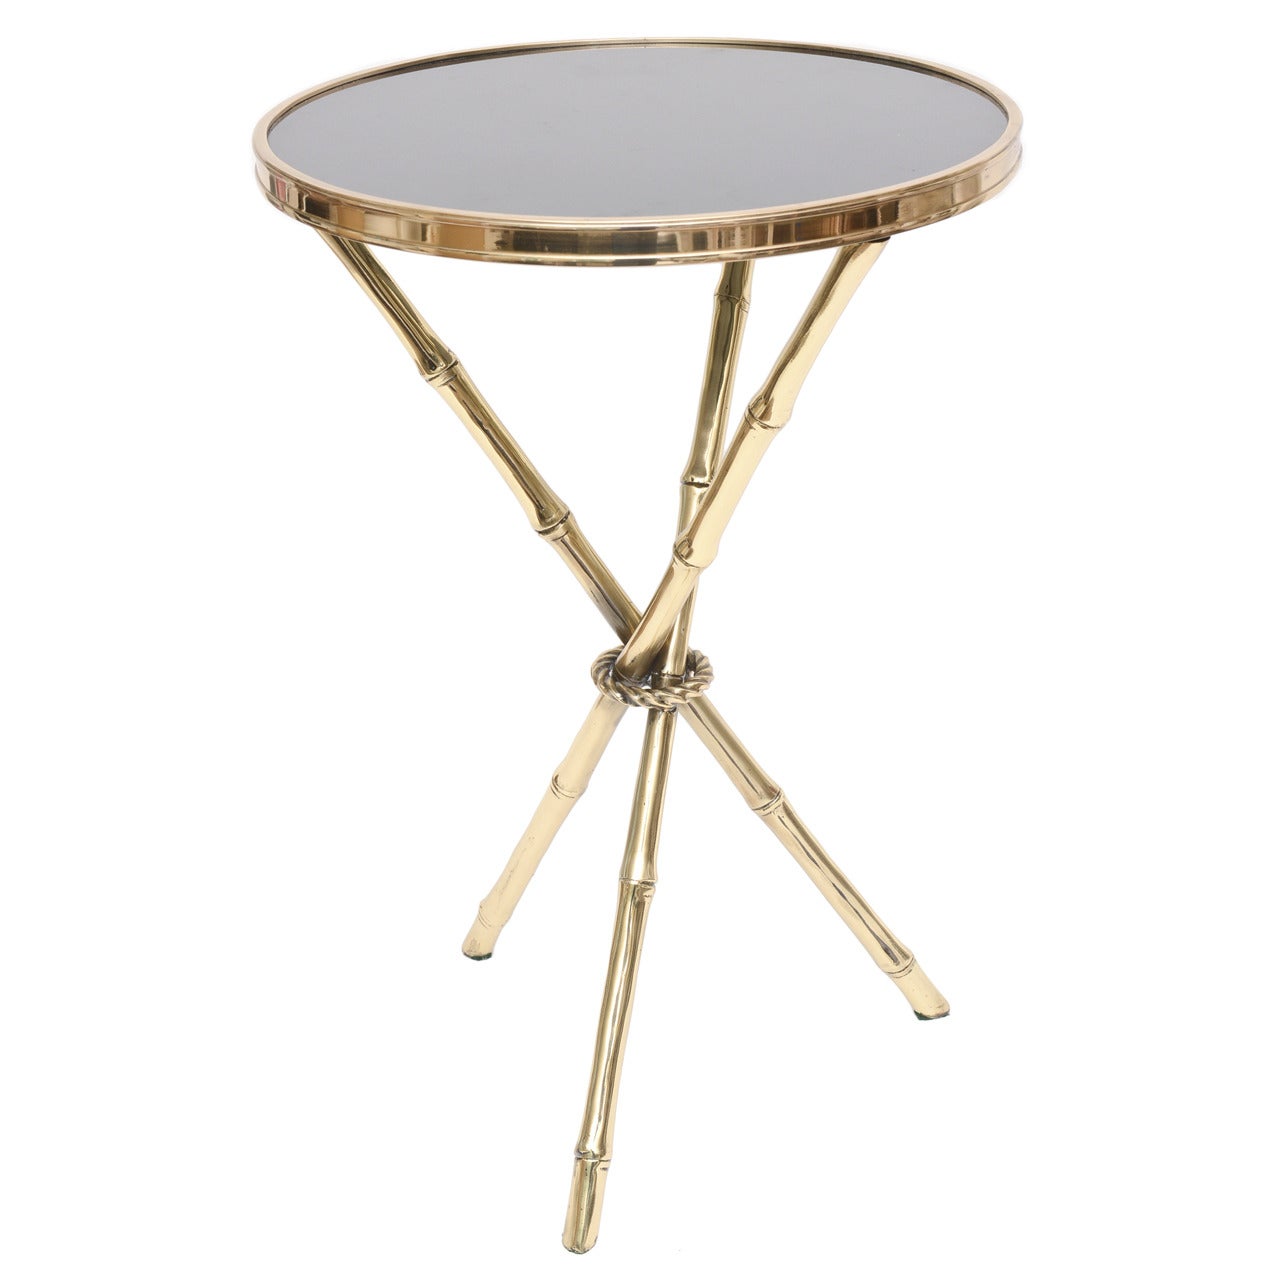 Chic Italian Polished Brass and Granite Faux Bamboo Tripod Side Table